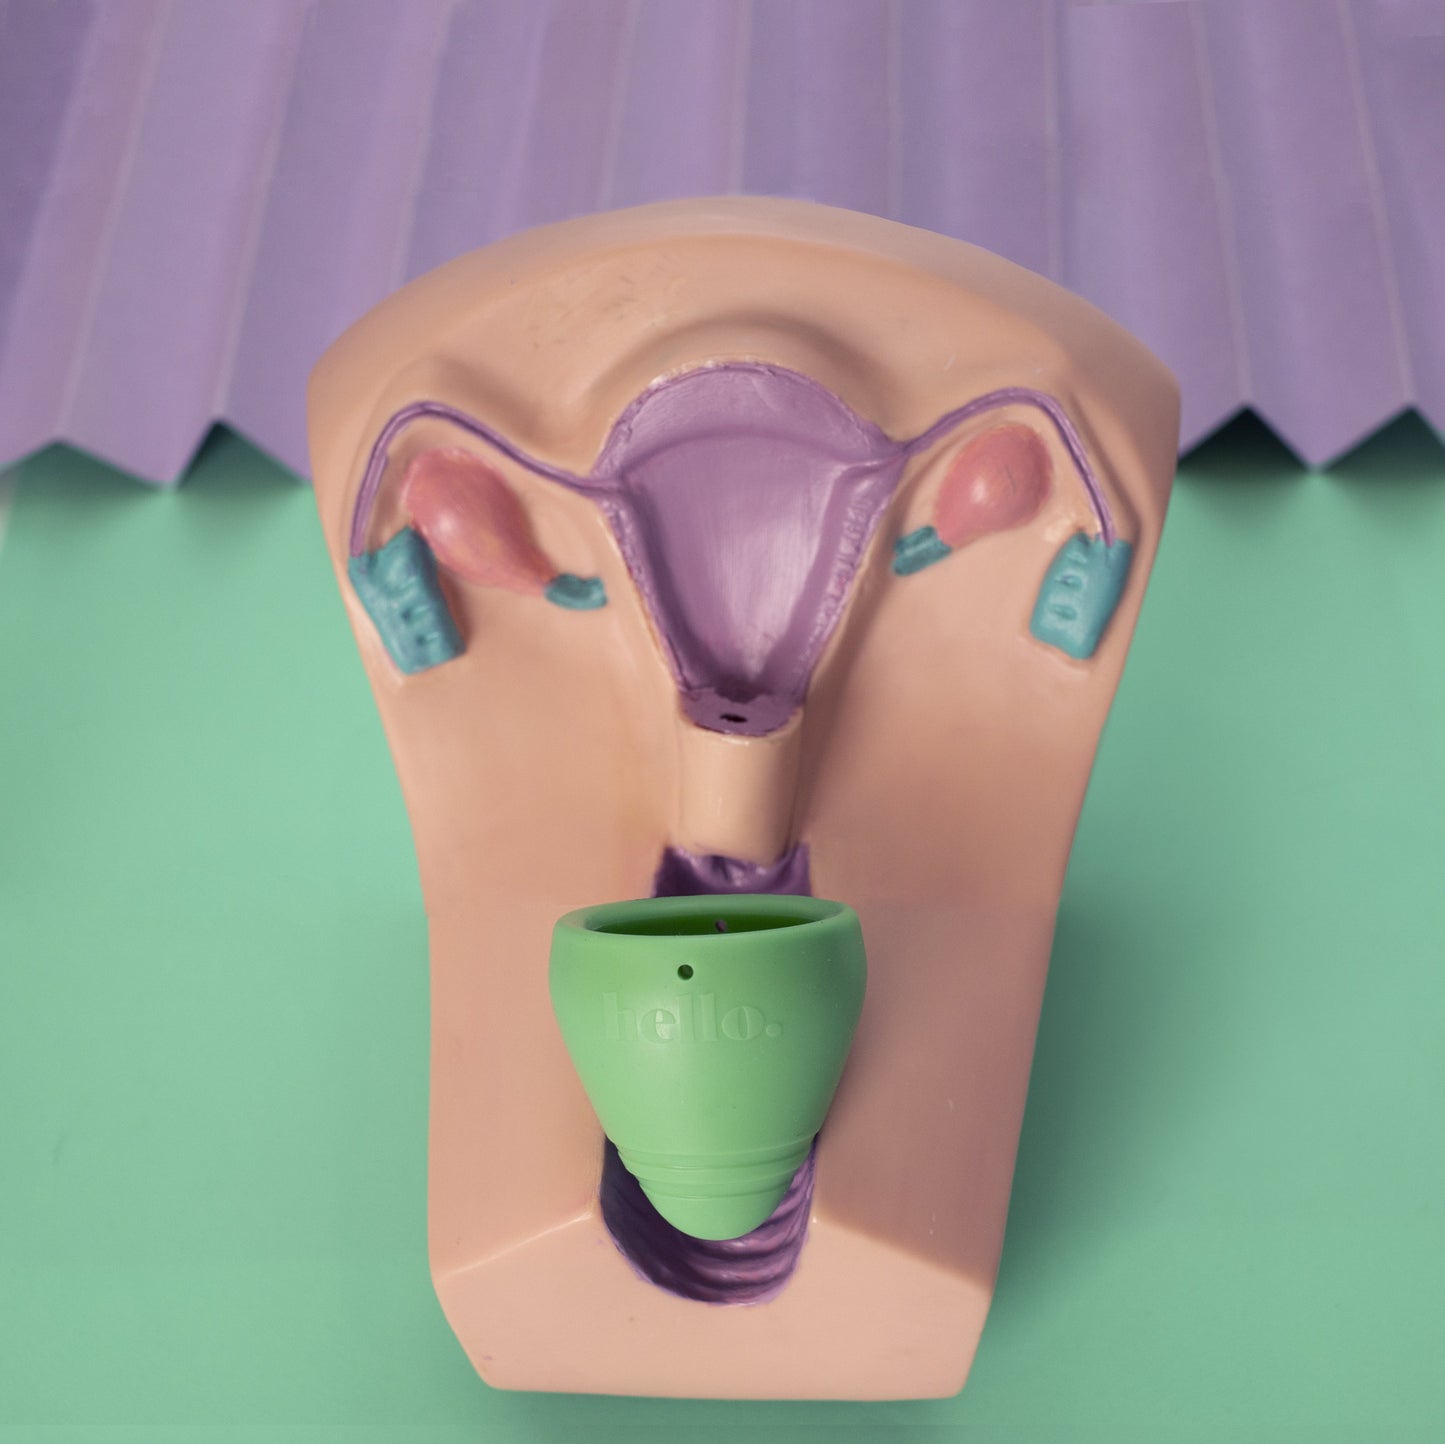 low cervix Hello Cup in anatomy model for scale